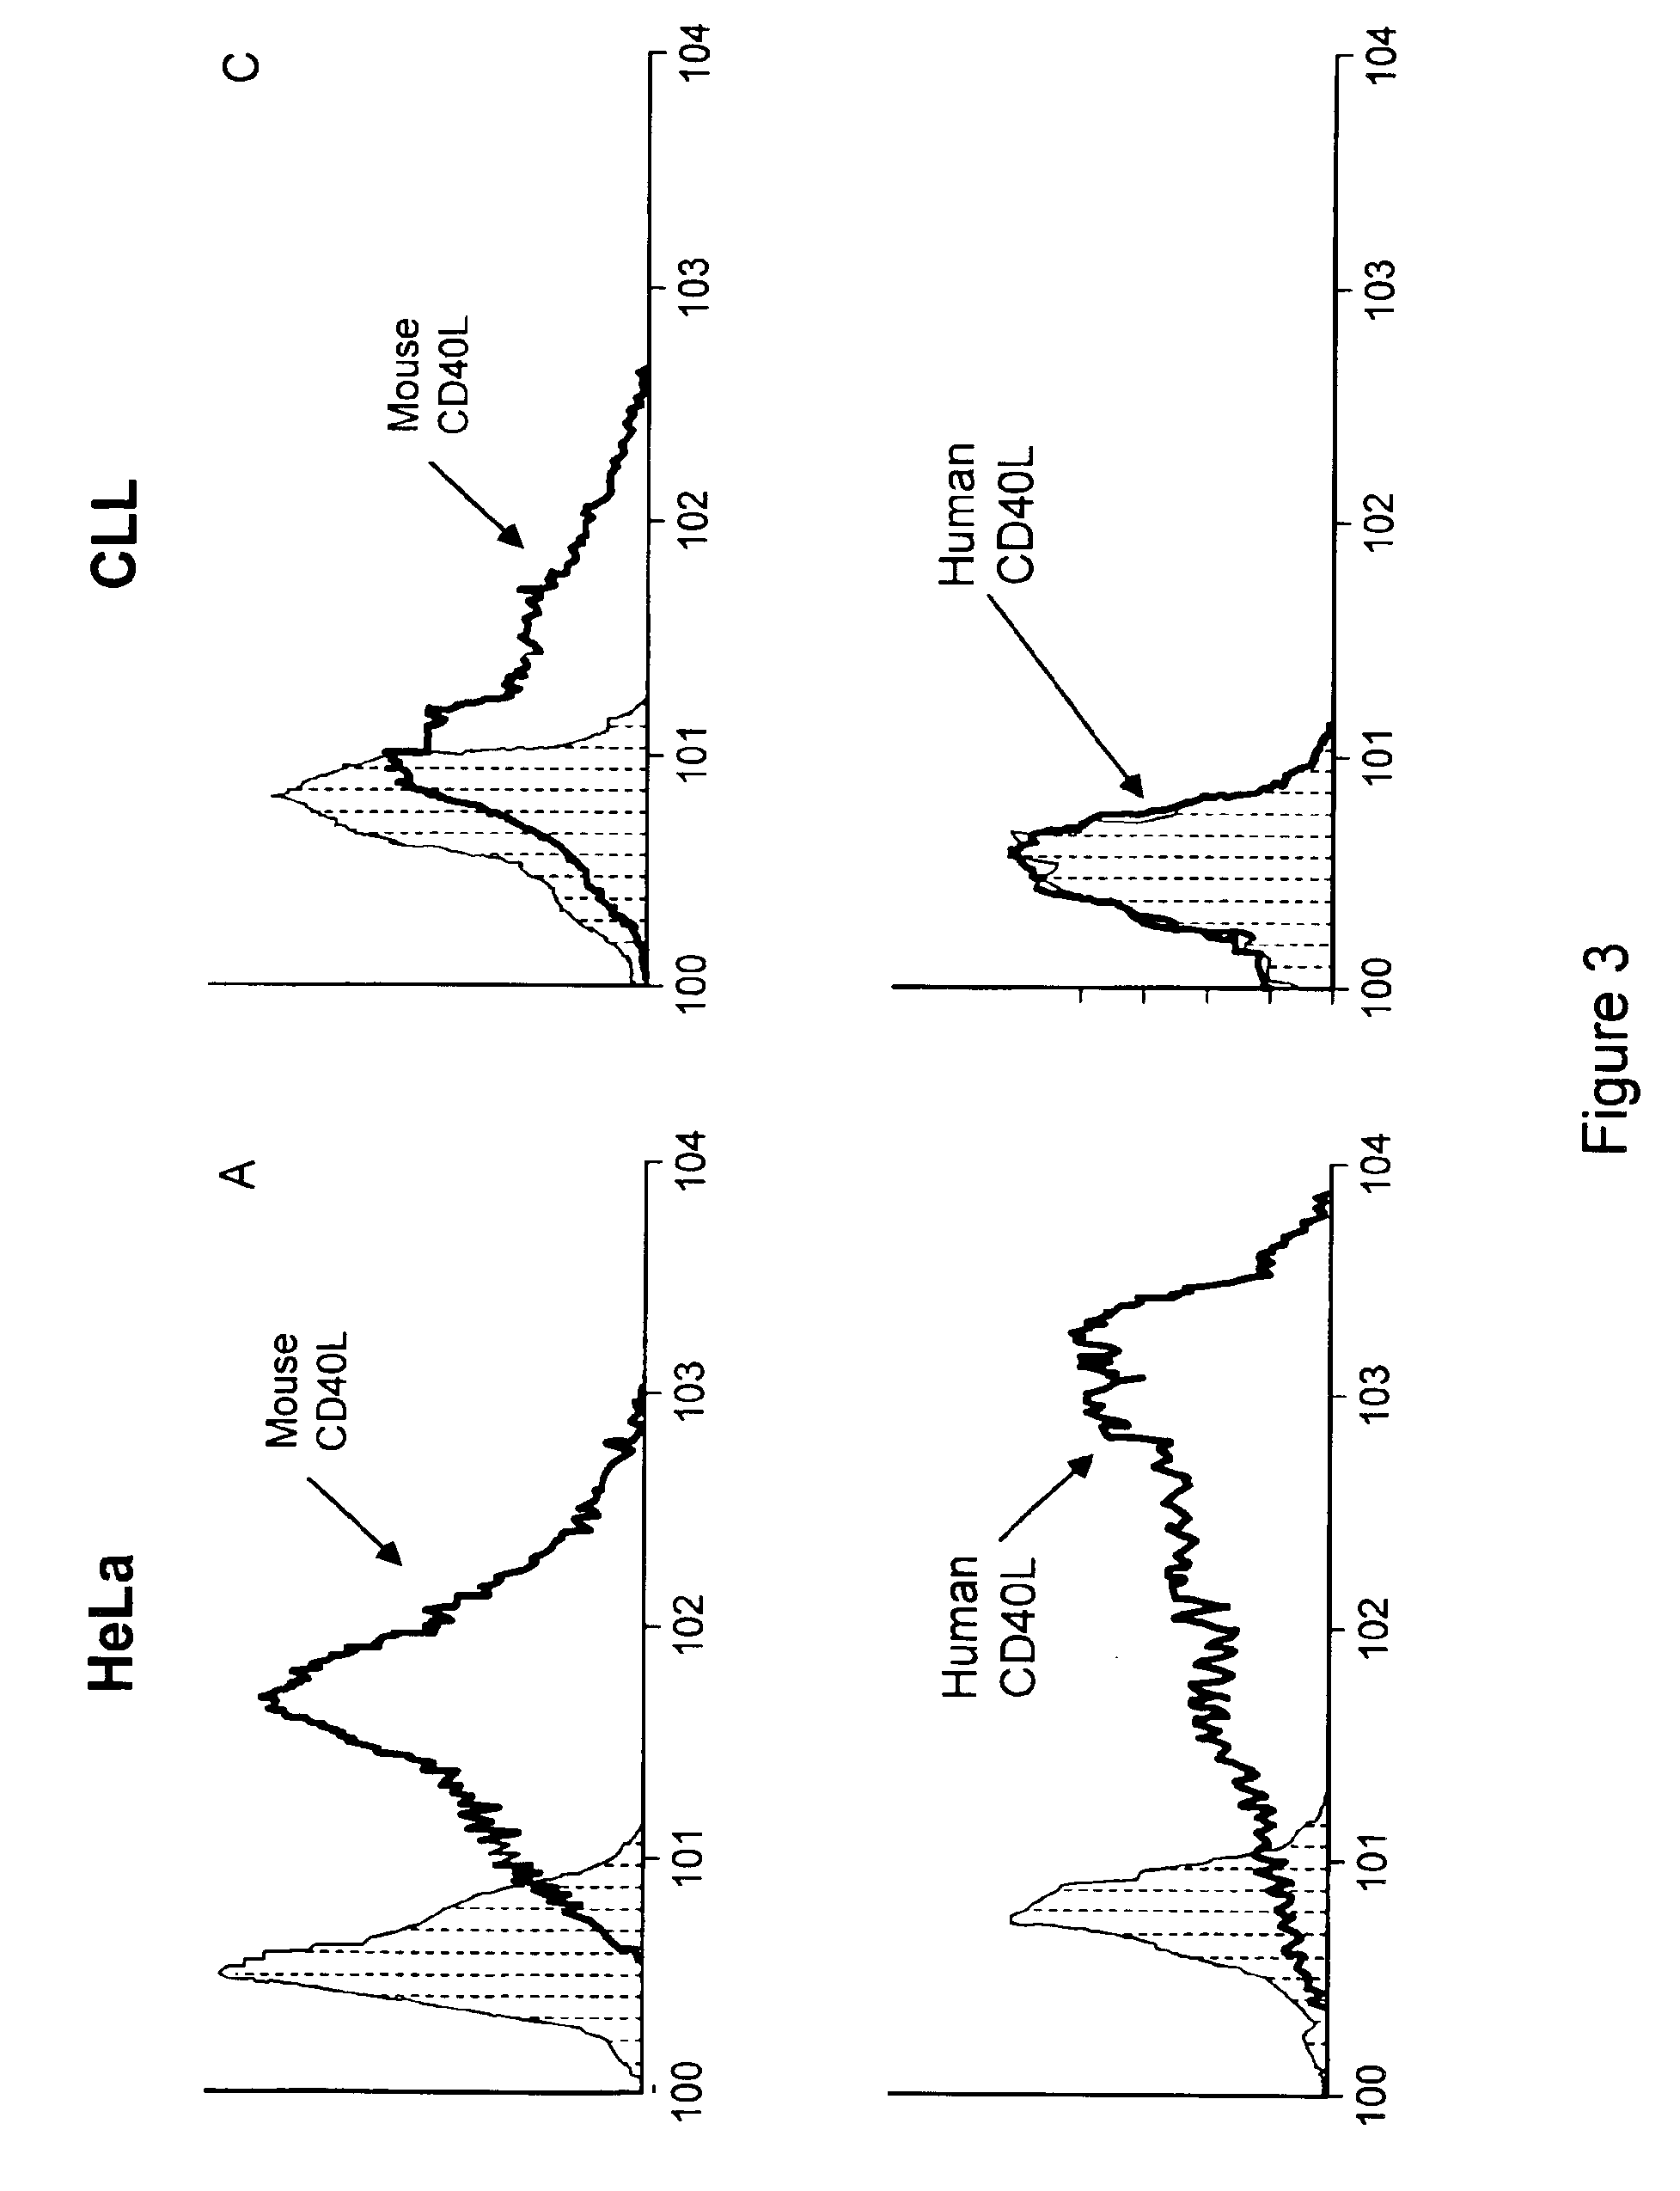 Methods of expressing chimeric mouse and human CD40 ligand in human CD40+ cells